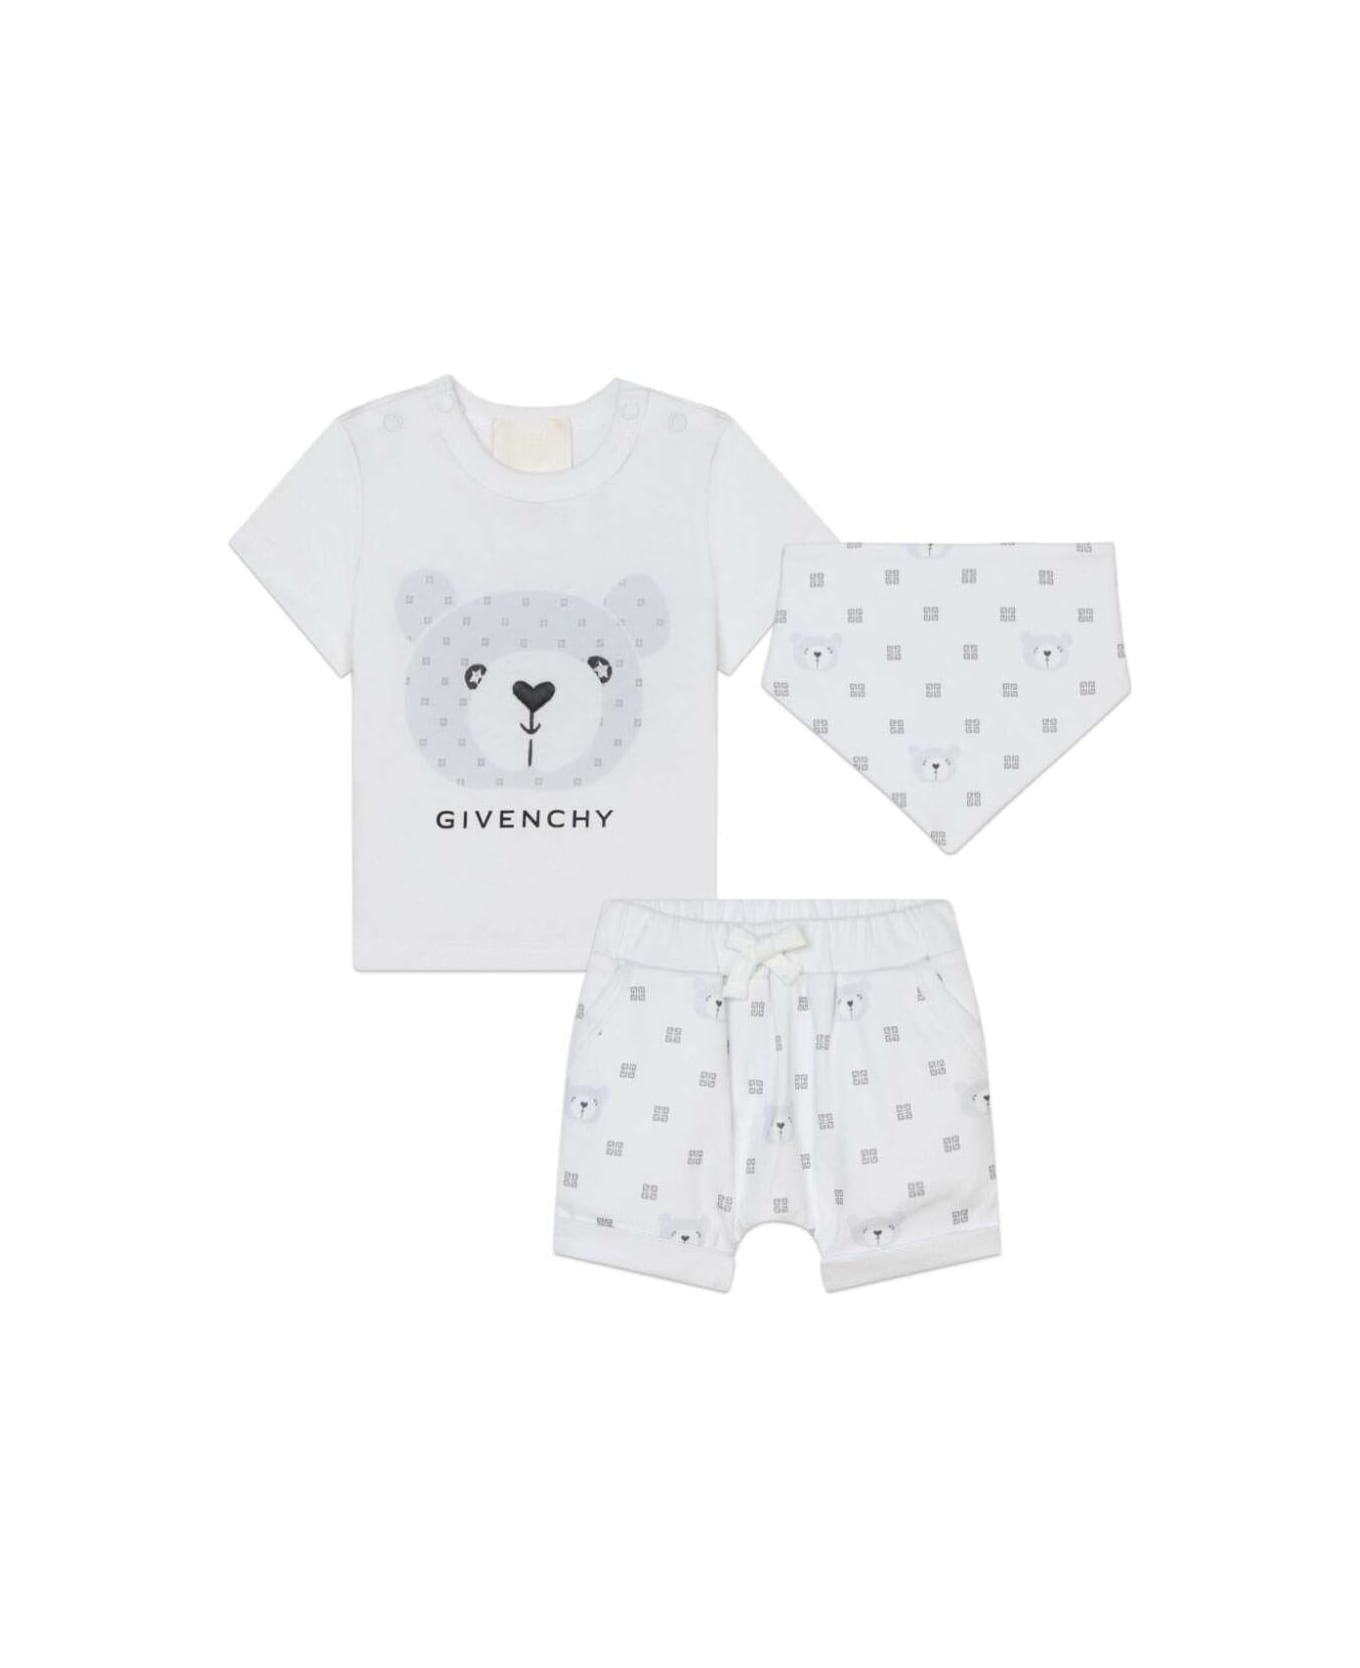 Givenchy White T-shirt, Shorts And Bandana Set With Teddy Bear Print In Cotton Baby - White